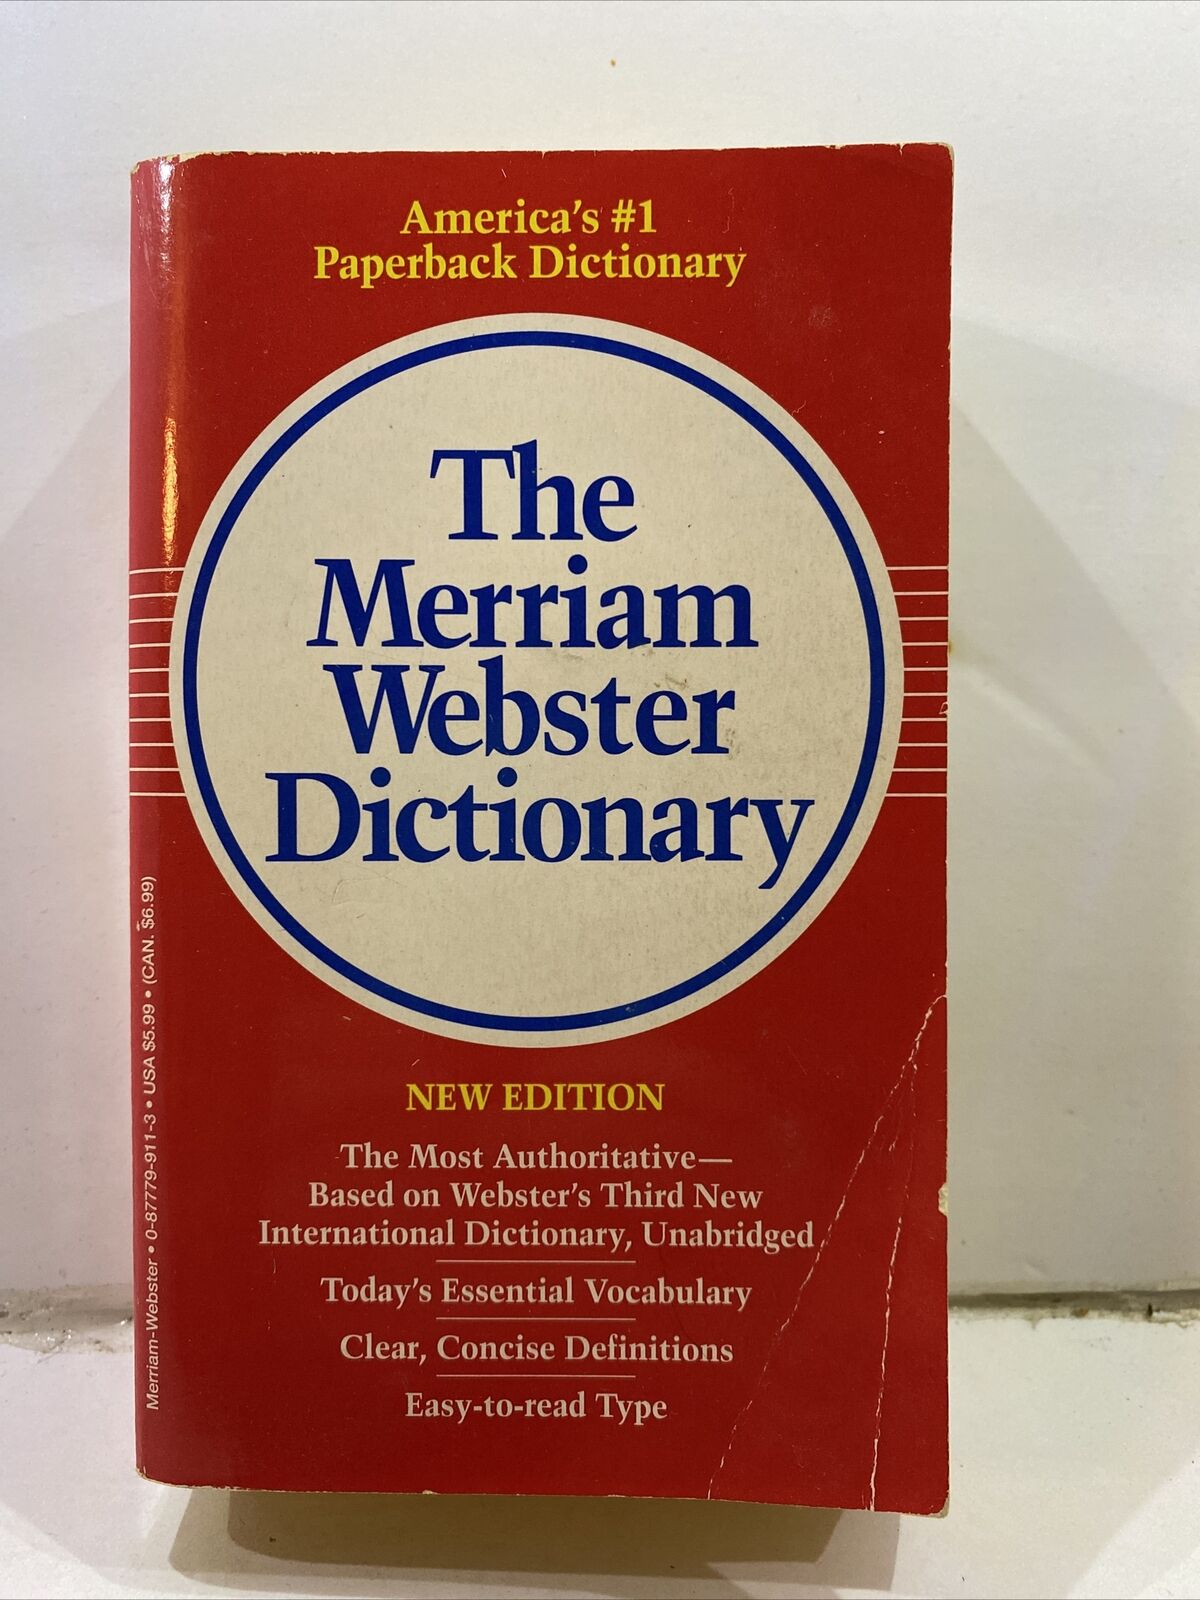 Thanks Definition & Meaning - Merriam-Webster